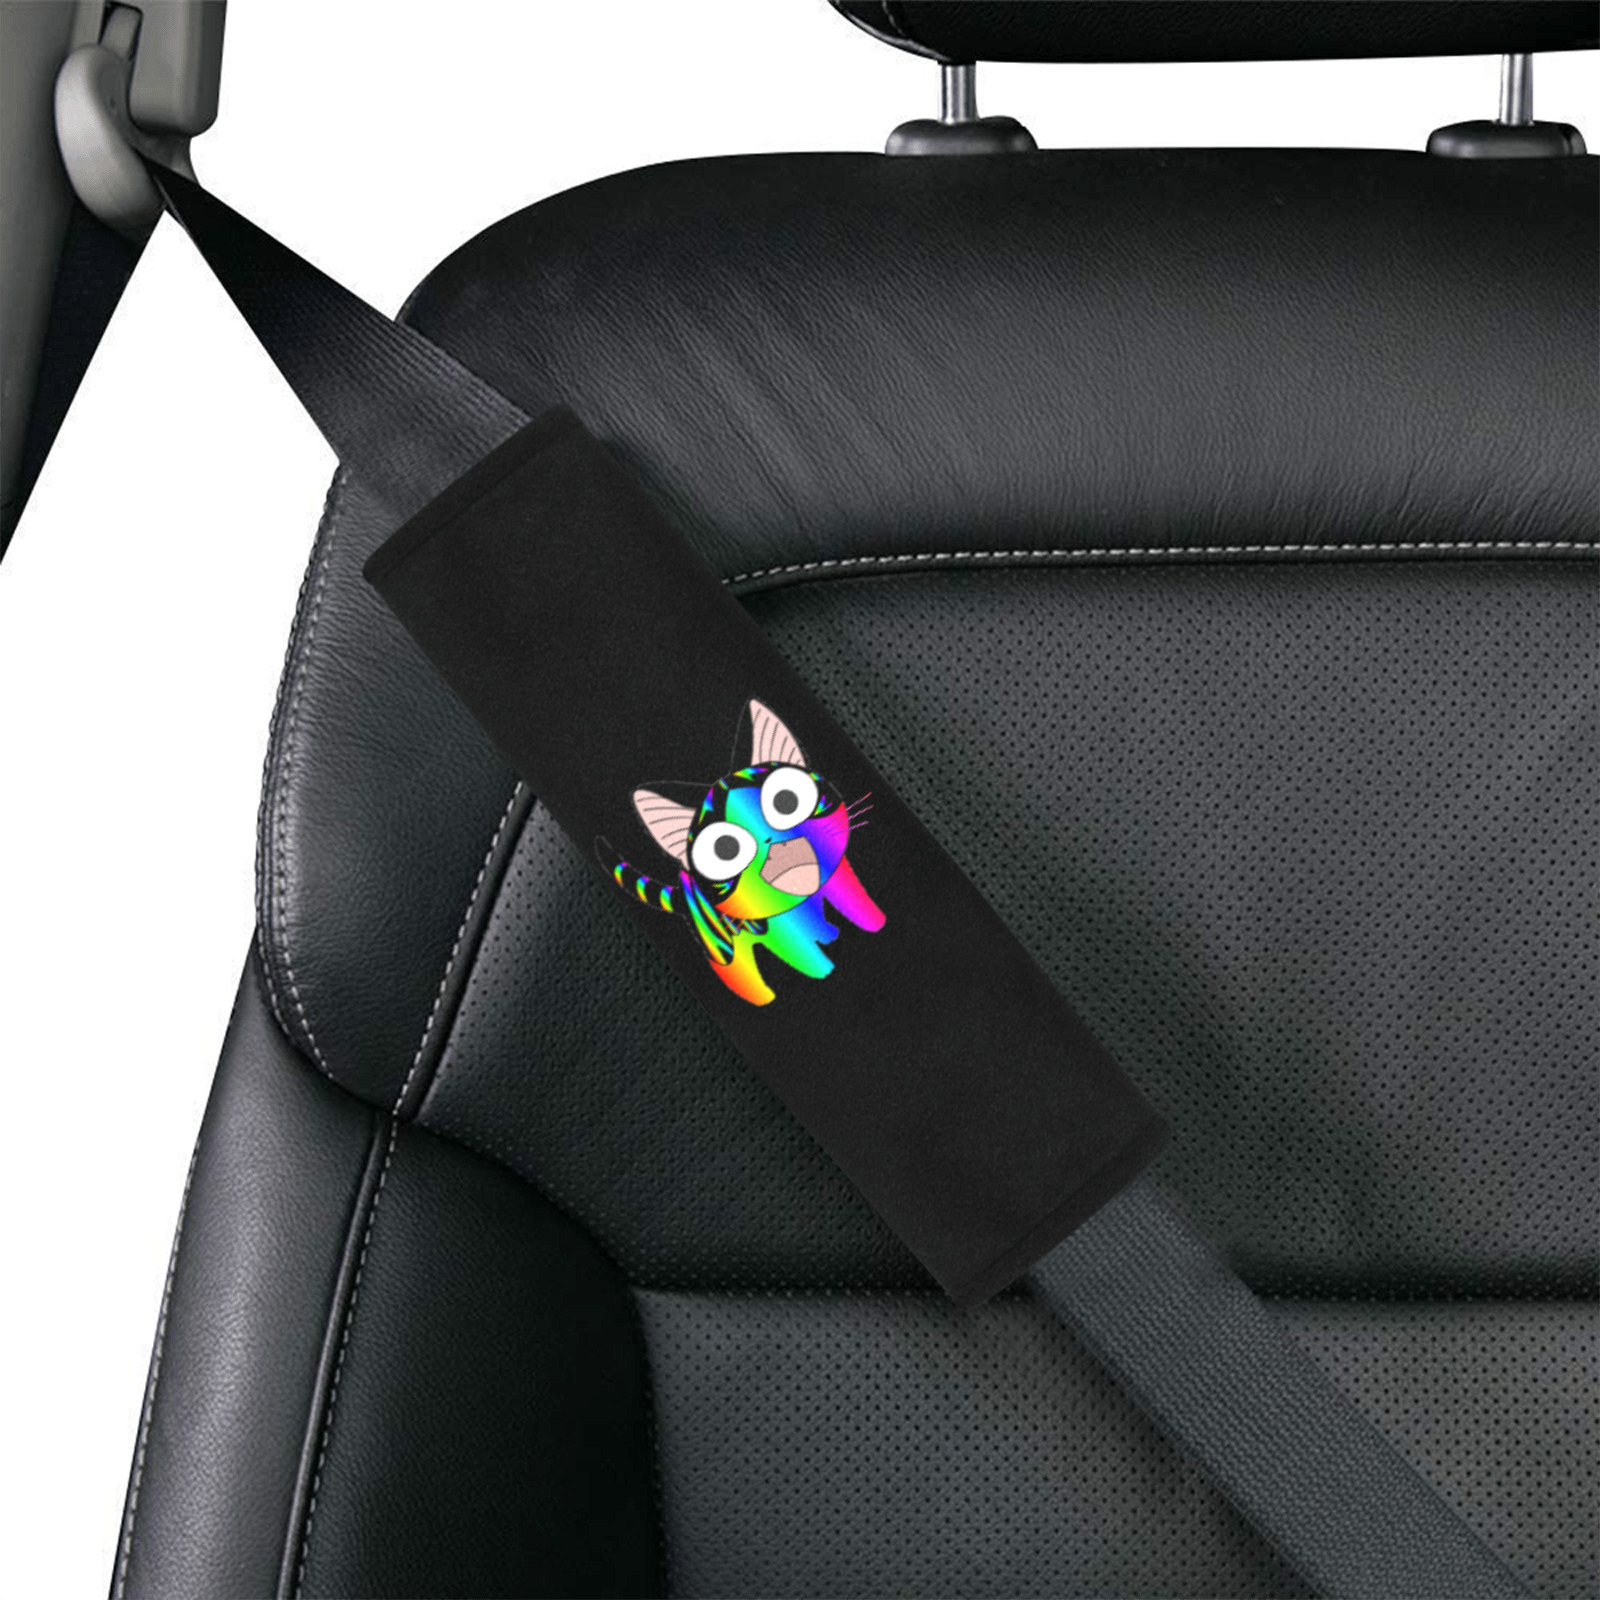 Rainbow Neon Kitty Cat Anime Car Seat Belt Cover 7''x8.5'' (Pack of 2)